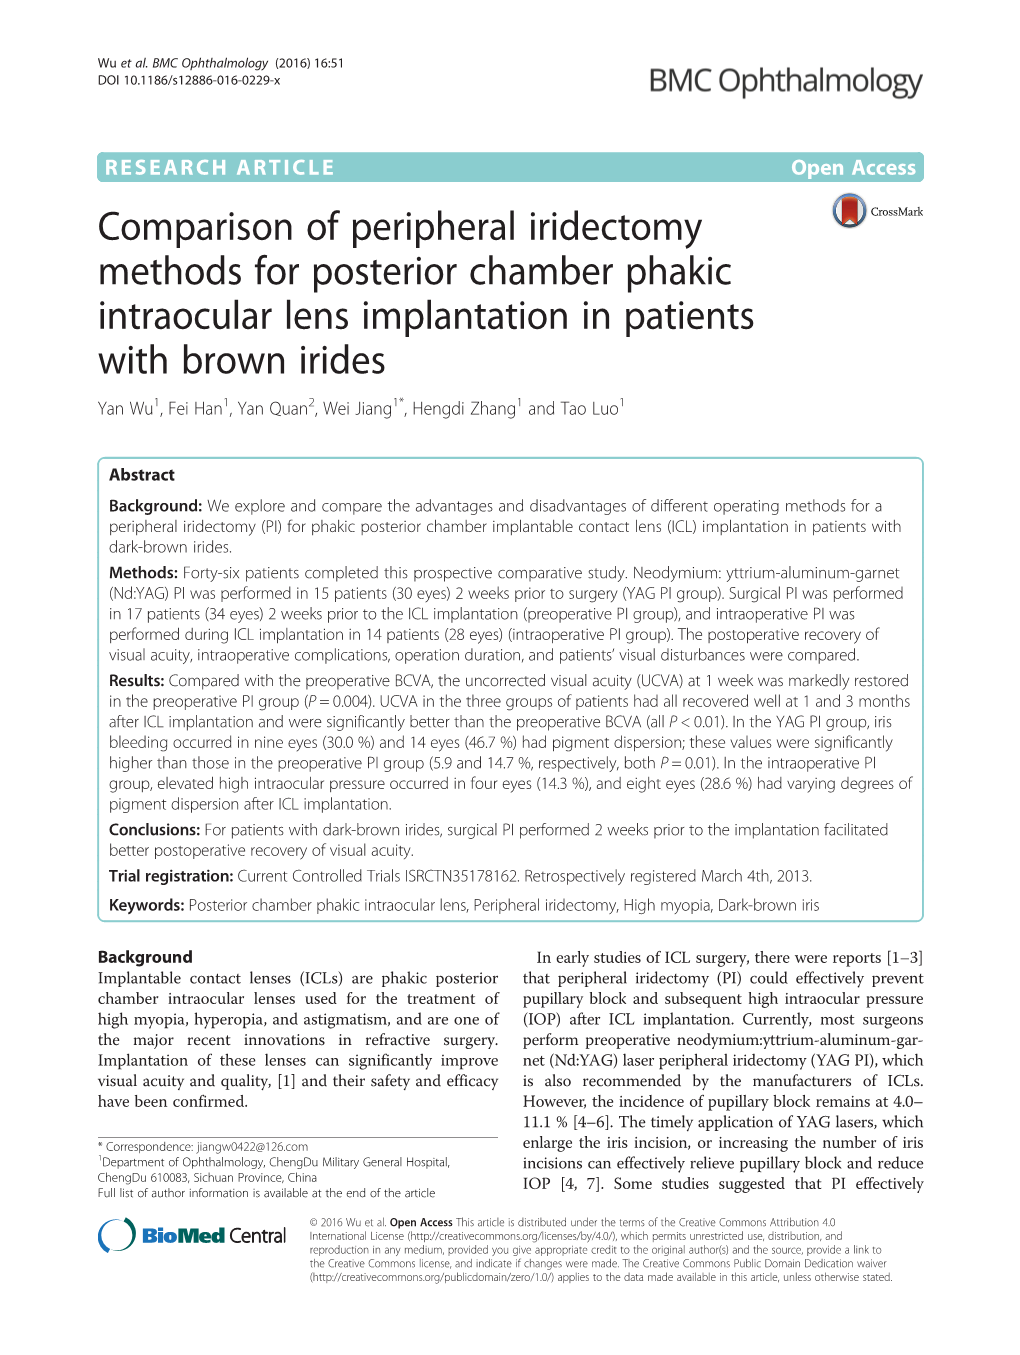 Comparison of Peripheral Iridectomy Methods for Posterior Chamber